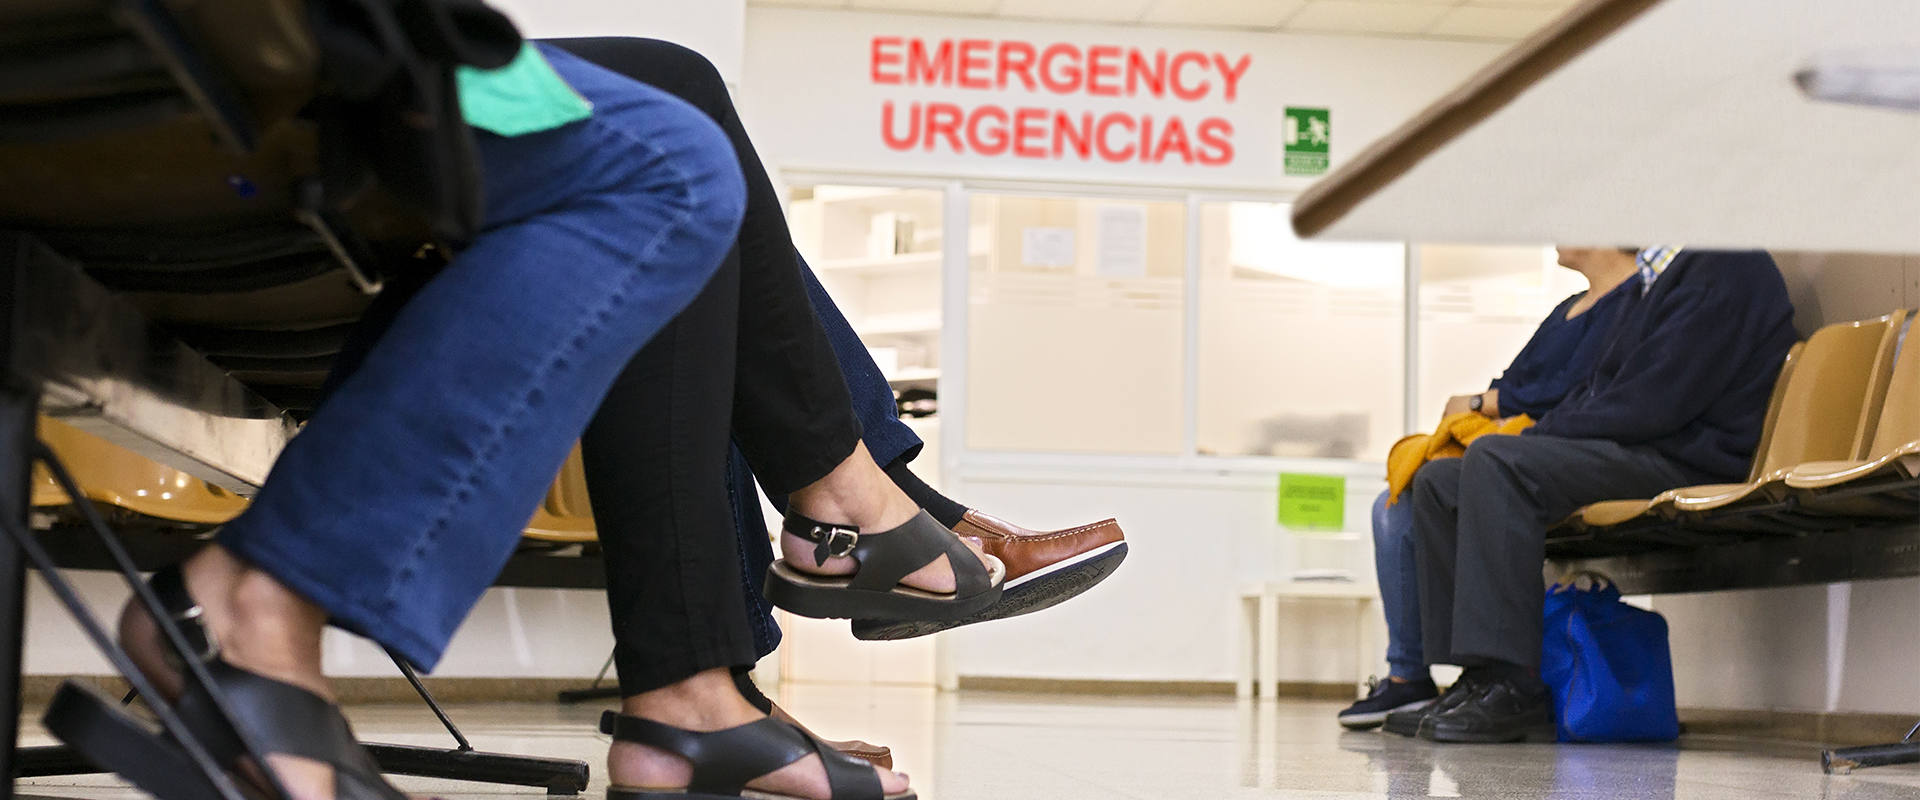 JCMC emergency department is available 24 hours a day, year round